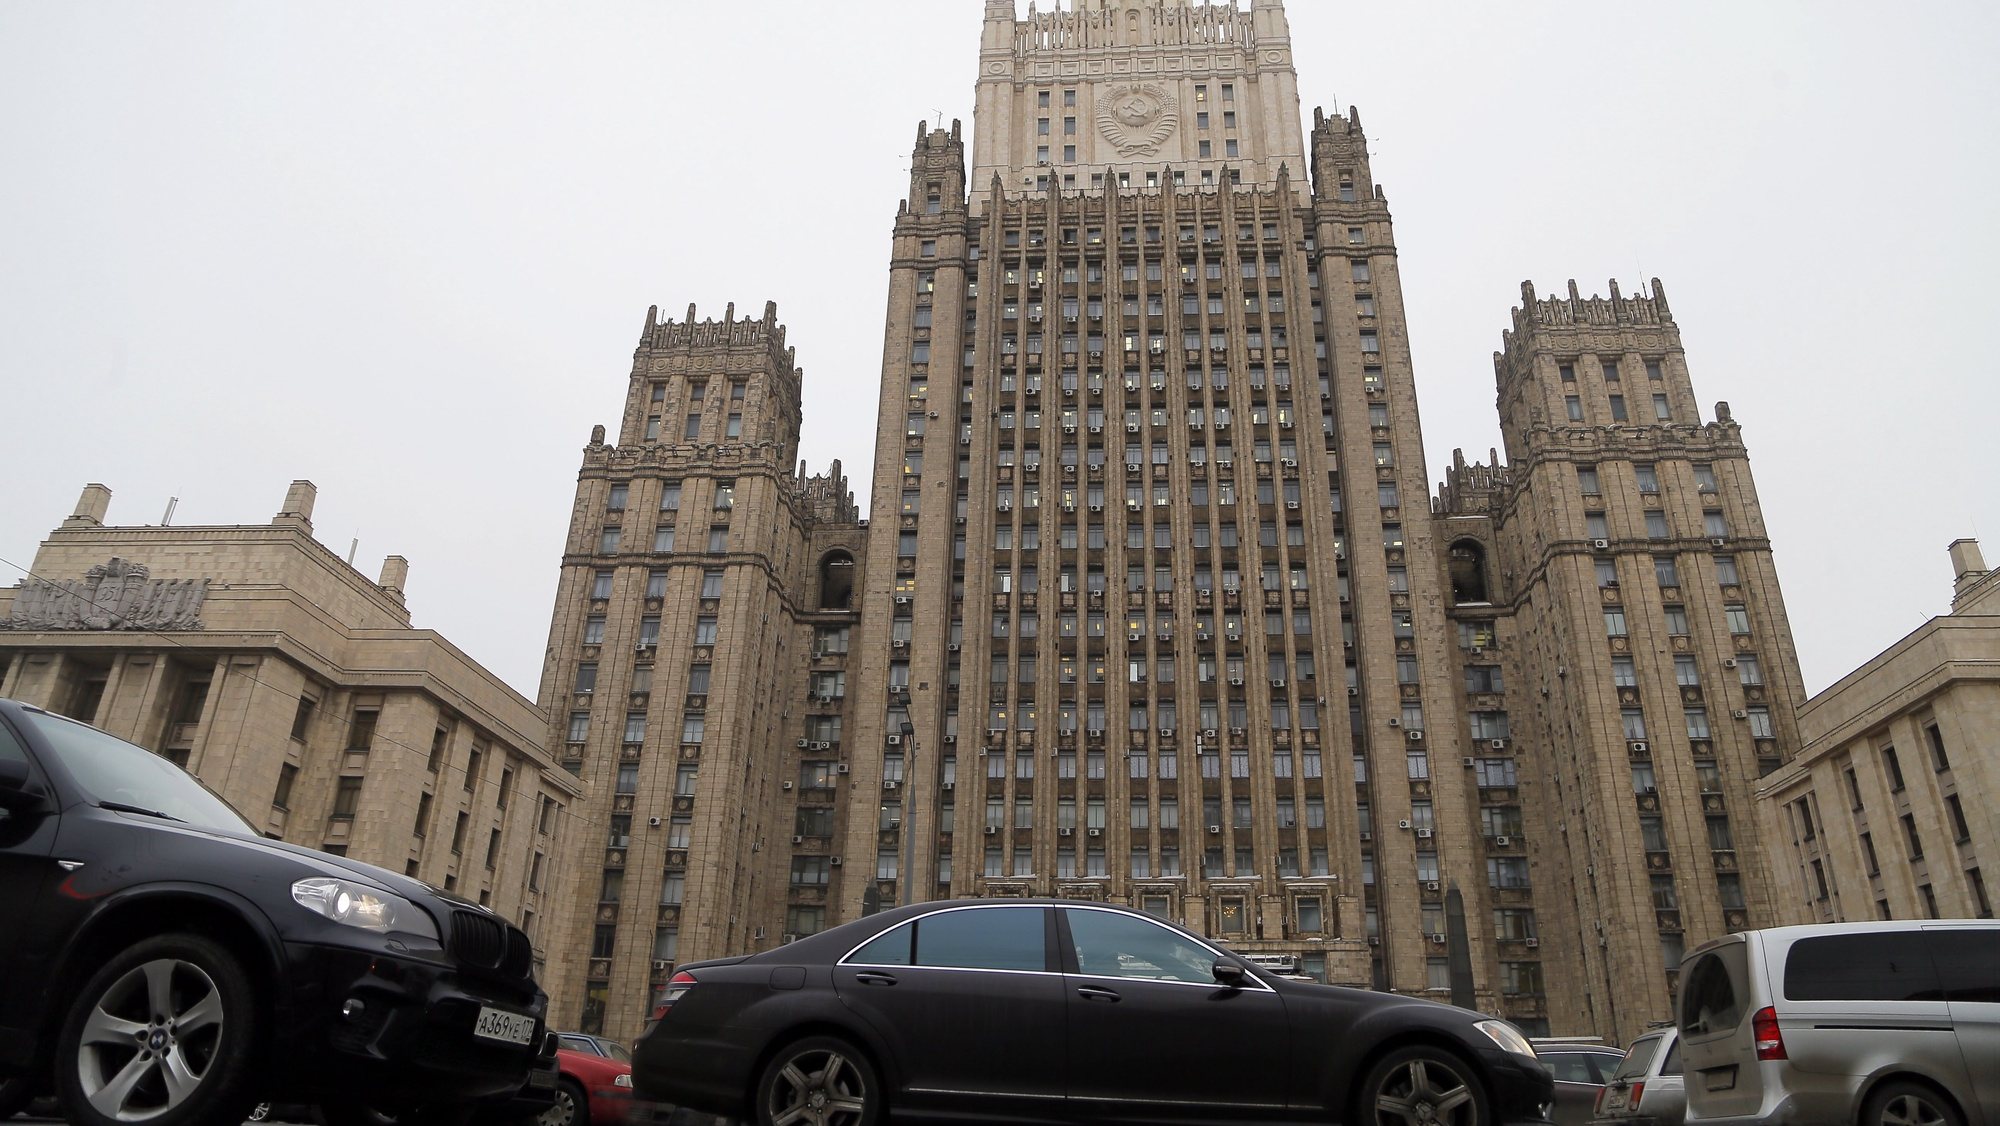 epa06618088 Russian Foreign Ministry building in Moscow, Russia, 21 March 2018, as  foreign diplomats attend a Russian Foreign Ministry&#039;s briefing on Sergei Skripal and his daughter Yulia  poisoning case. British Prime Minister Theresa May ordered the expulsion of 23 Russian diplomats, who left Britain on 20 March, in retaliation for the poisoning of the former Russian spy Sergei Skripal aged 66 and his daughter Yulia, aged 33, who were found suffering from extreme exposure to a rare nerve agent in Salisbury southern England, on 04 March 2018. Skripal and his daughter Yulia remain in a &#039;very serious&#039; condition.  EPA/MAXIM SHIPENKOV